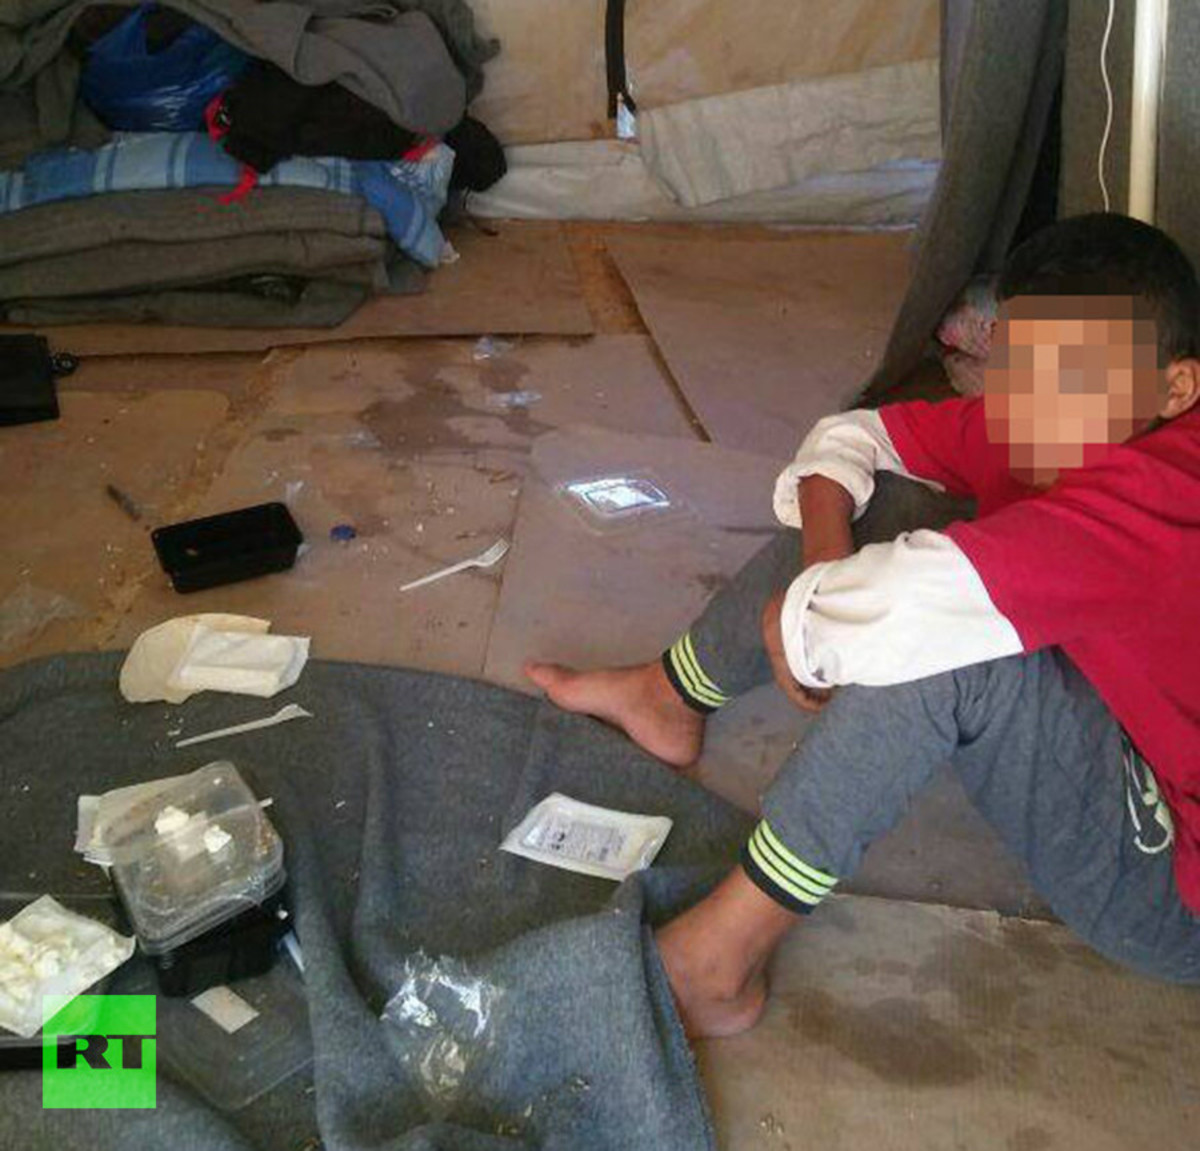  A young Syrian boy sits in the tent his five-year-old sister died in just hours earlier © RT